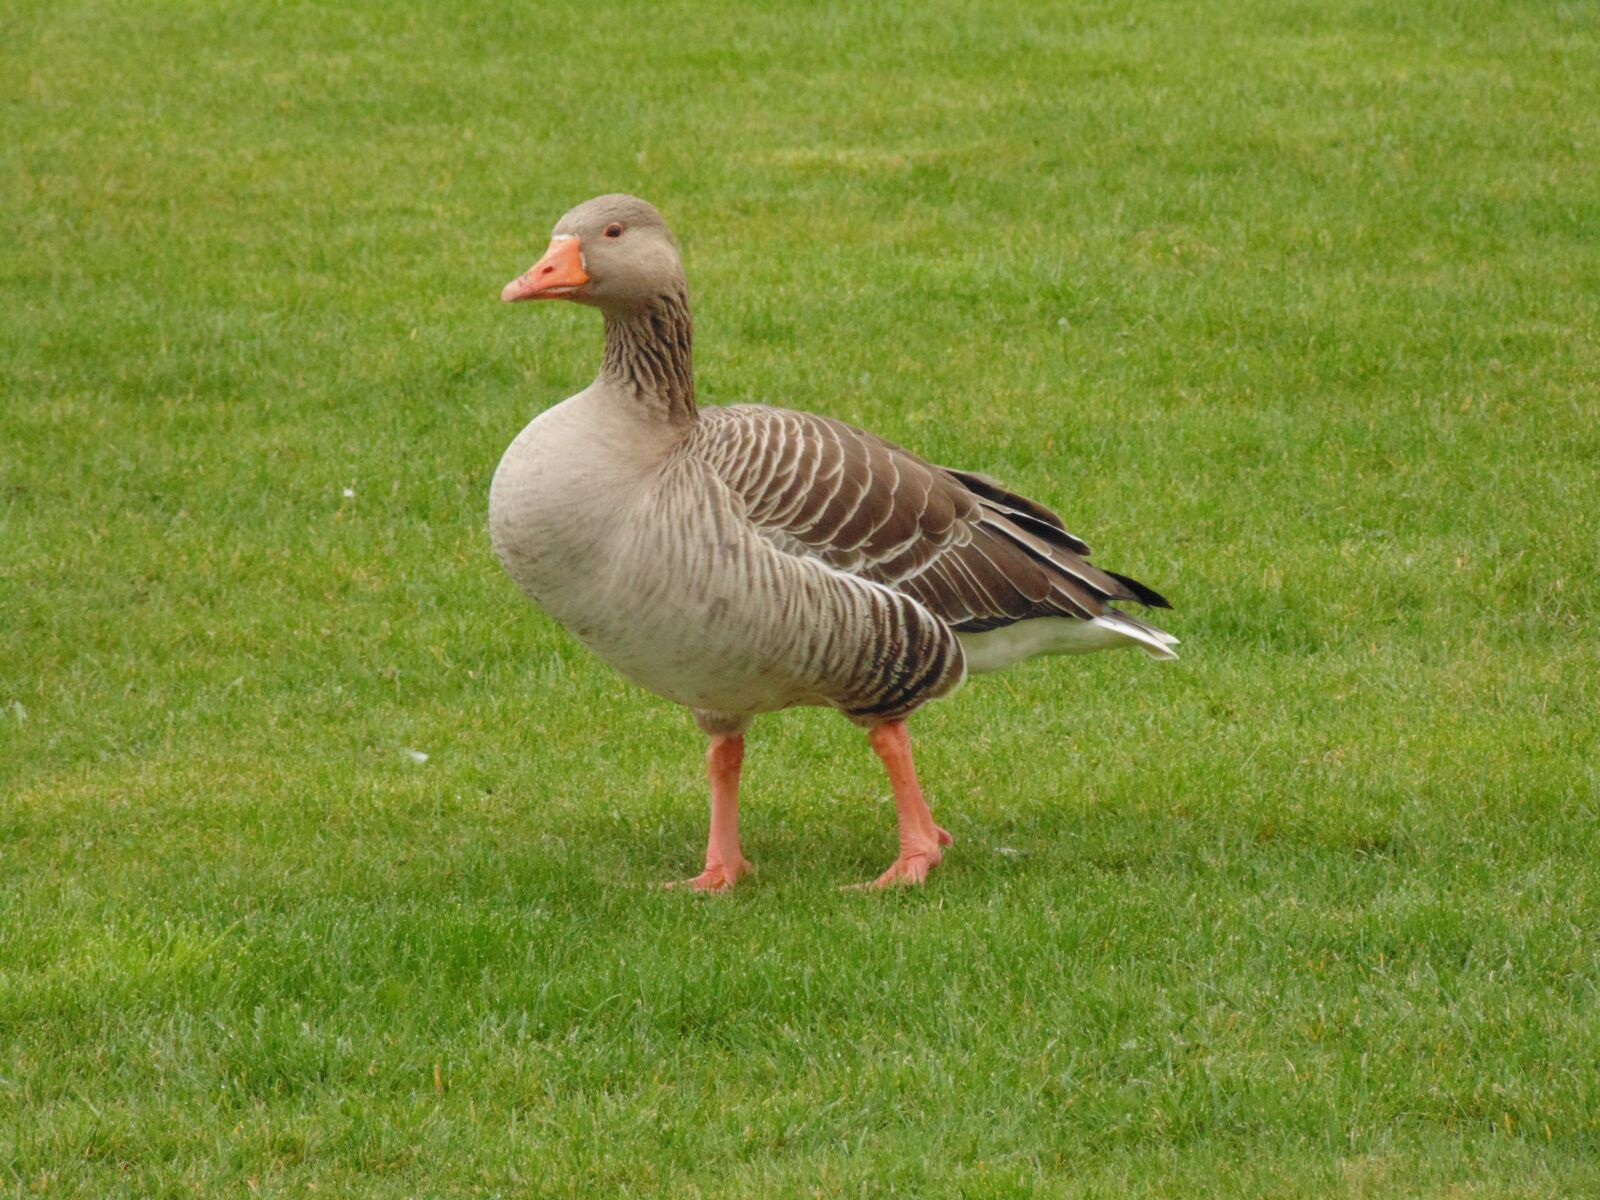 Sony Cyber-shot DSC-H200 sample photo. Goose, grass, nature photography